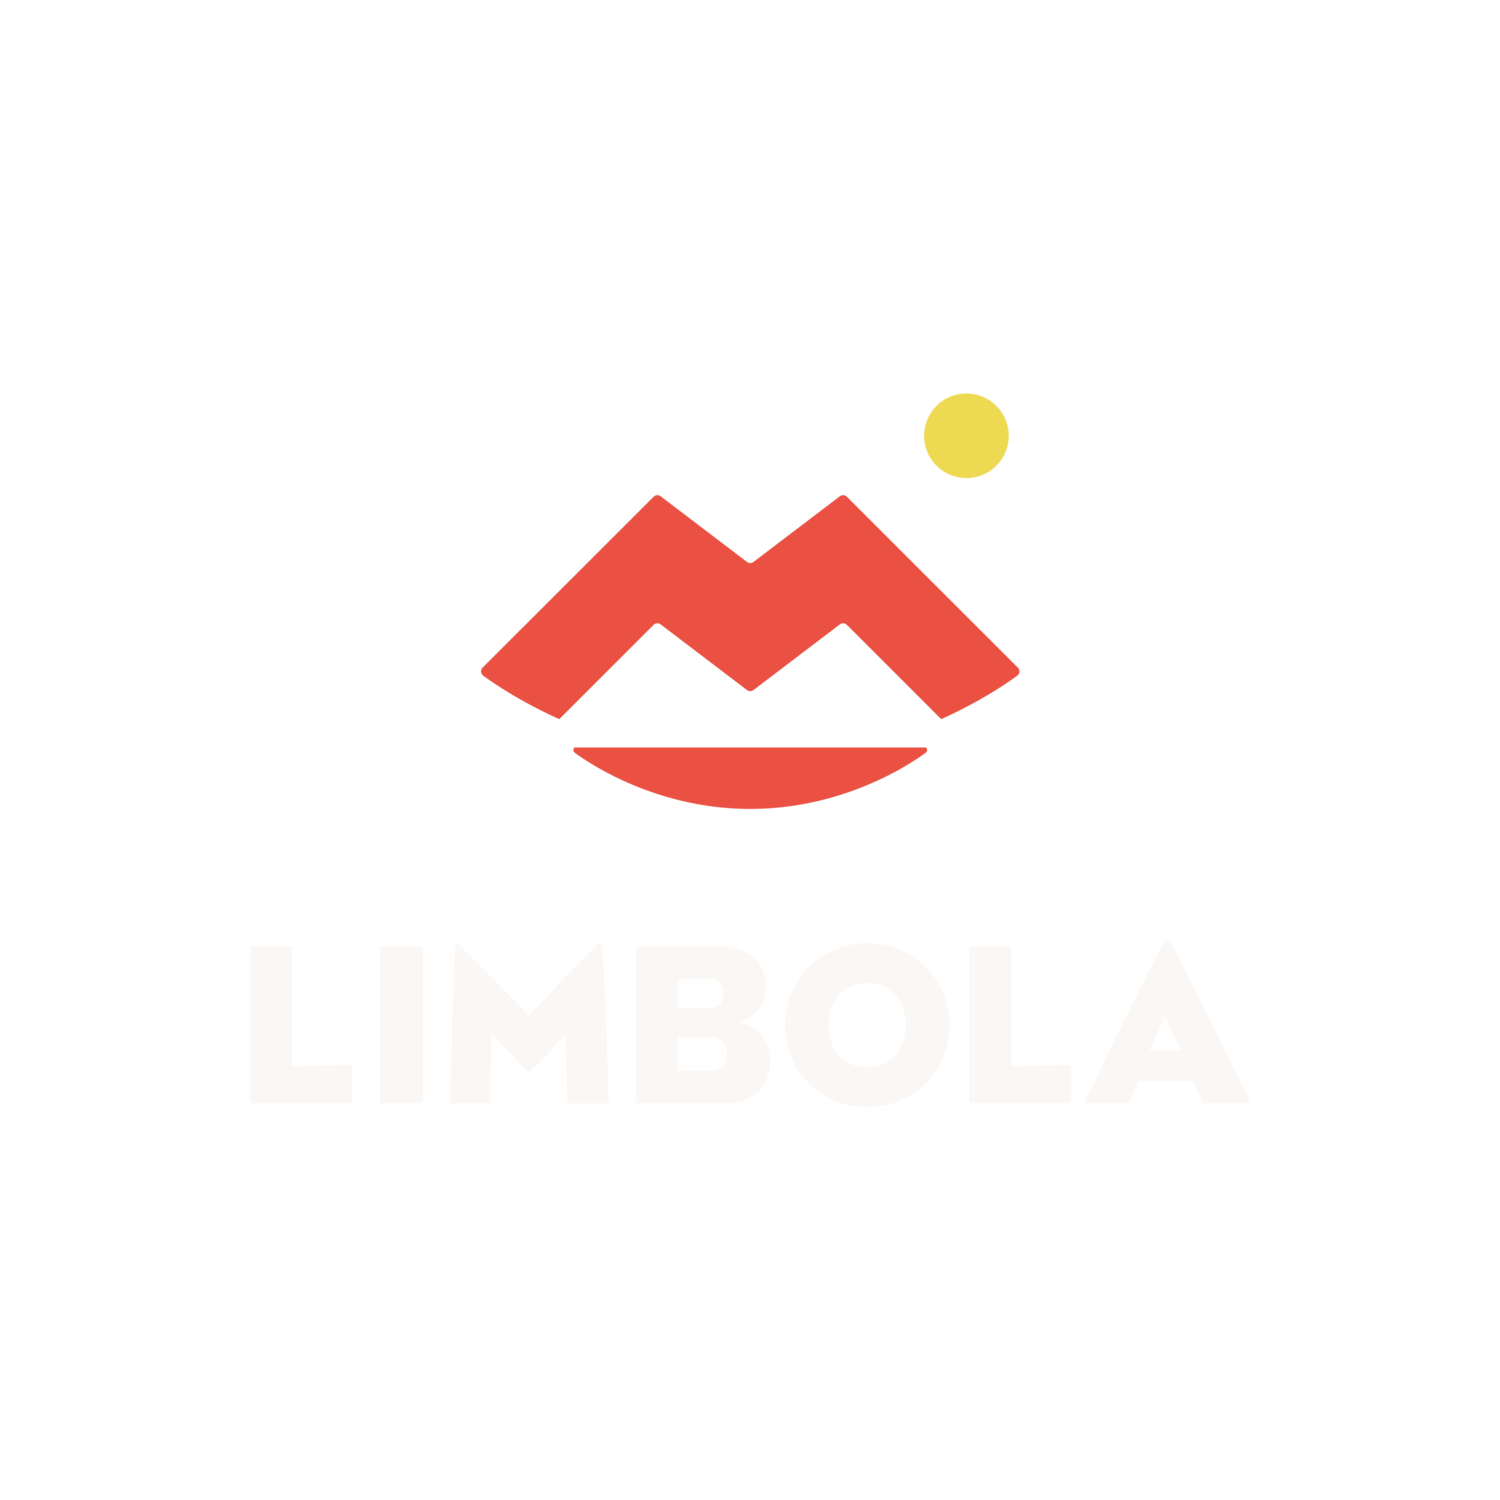 Limbola - TELL YOUR STORY